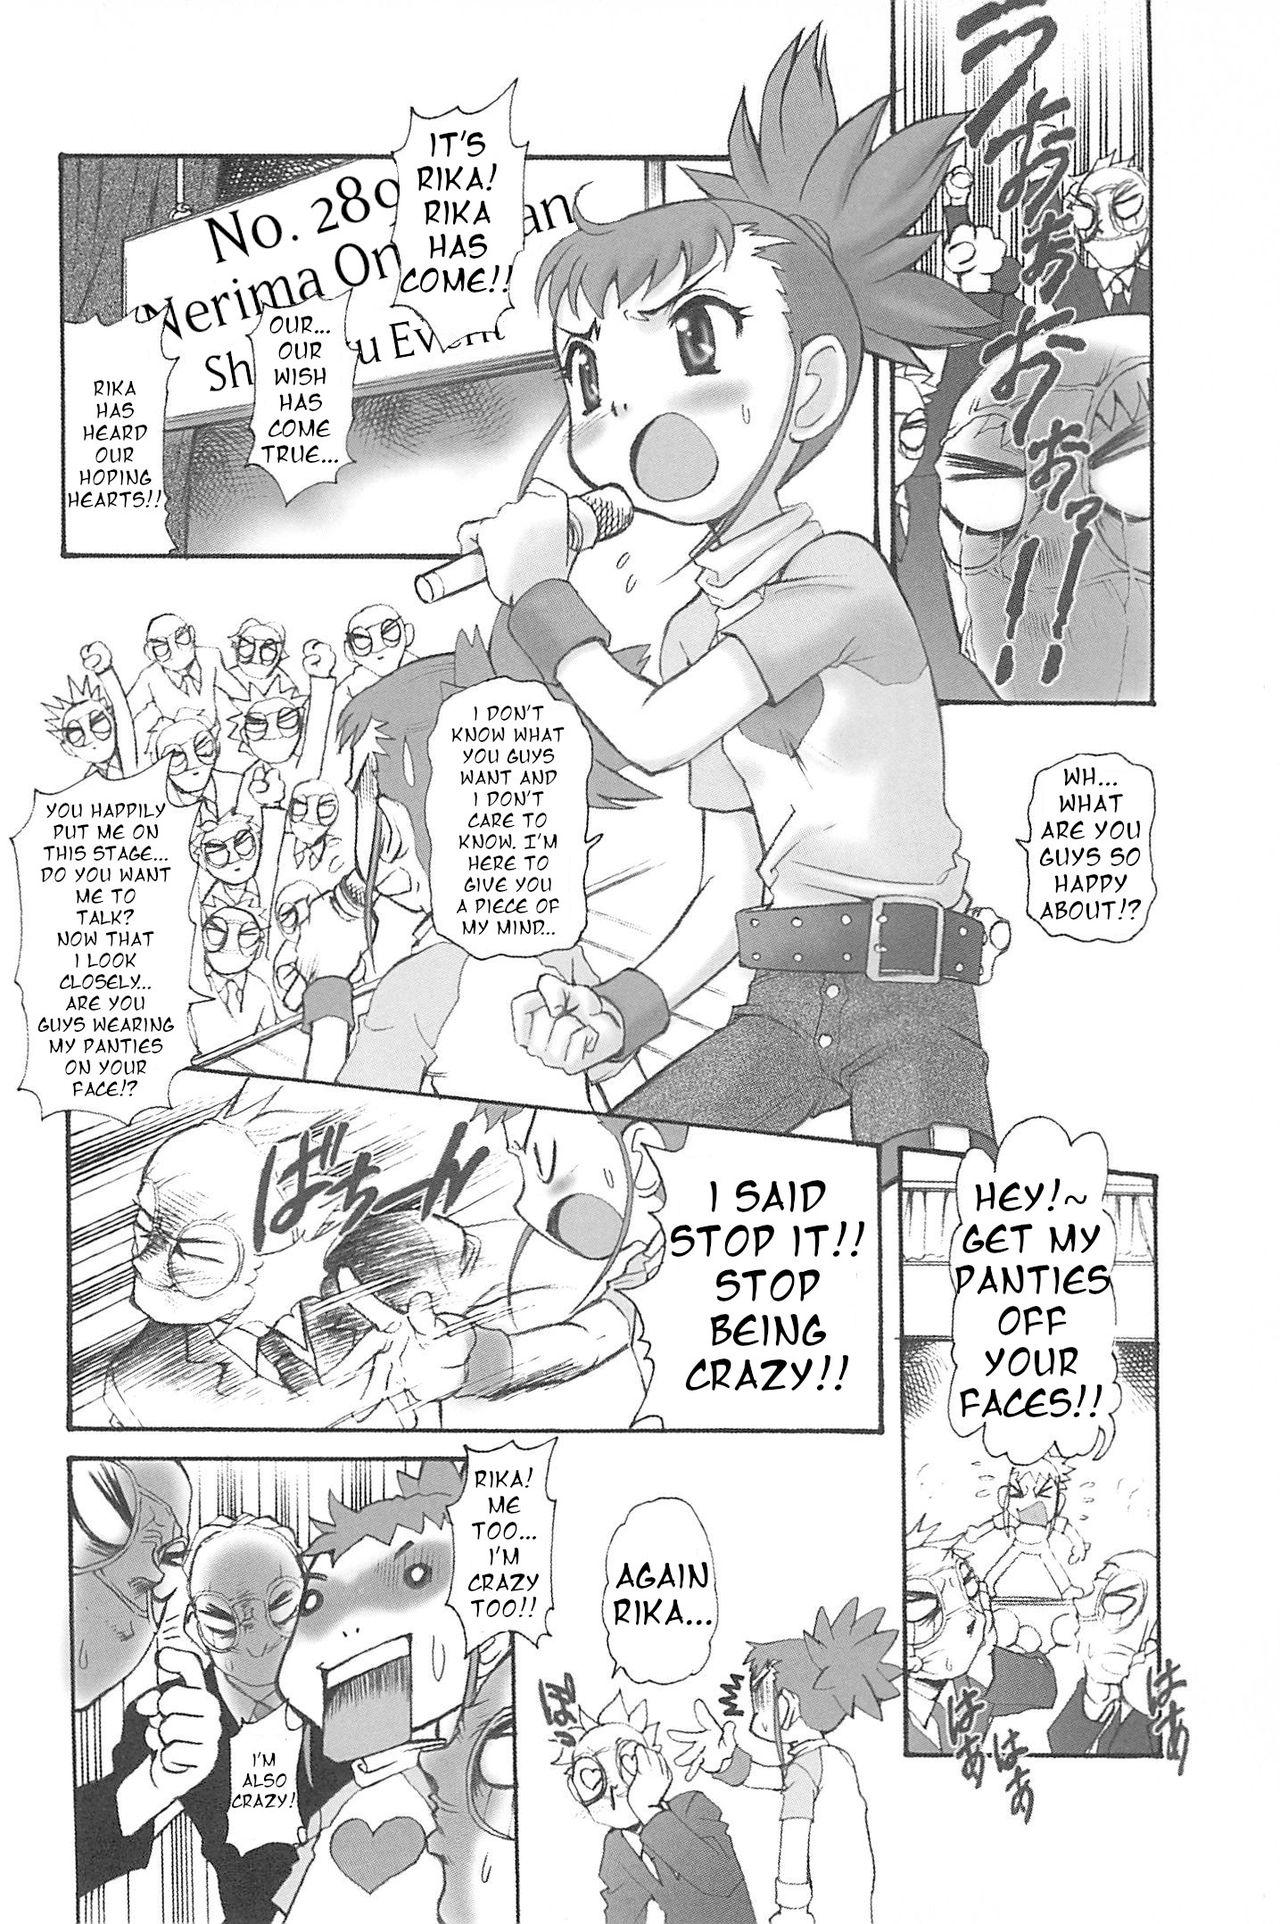 Wet Cunts Cranial Business Trip! Nerima's Onii-chan!! - Digimon Digimon tamers Granny - Page 2